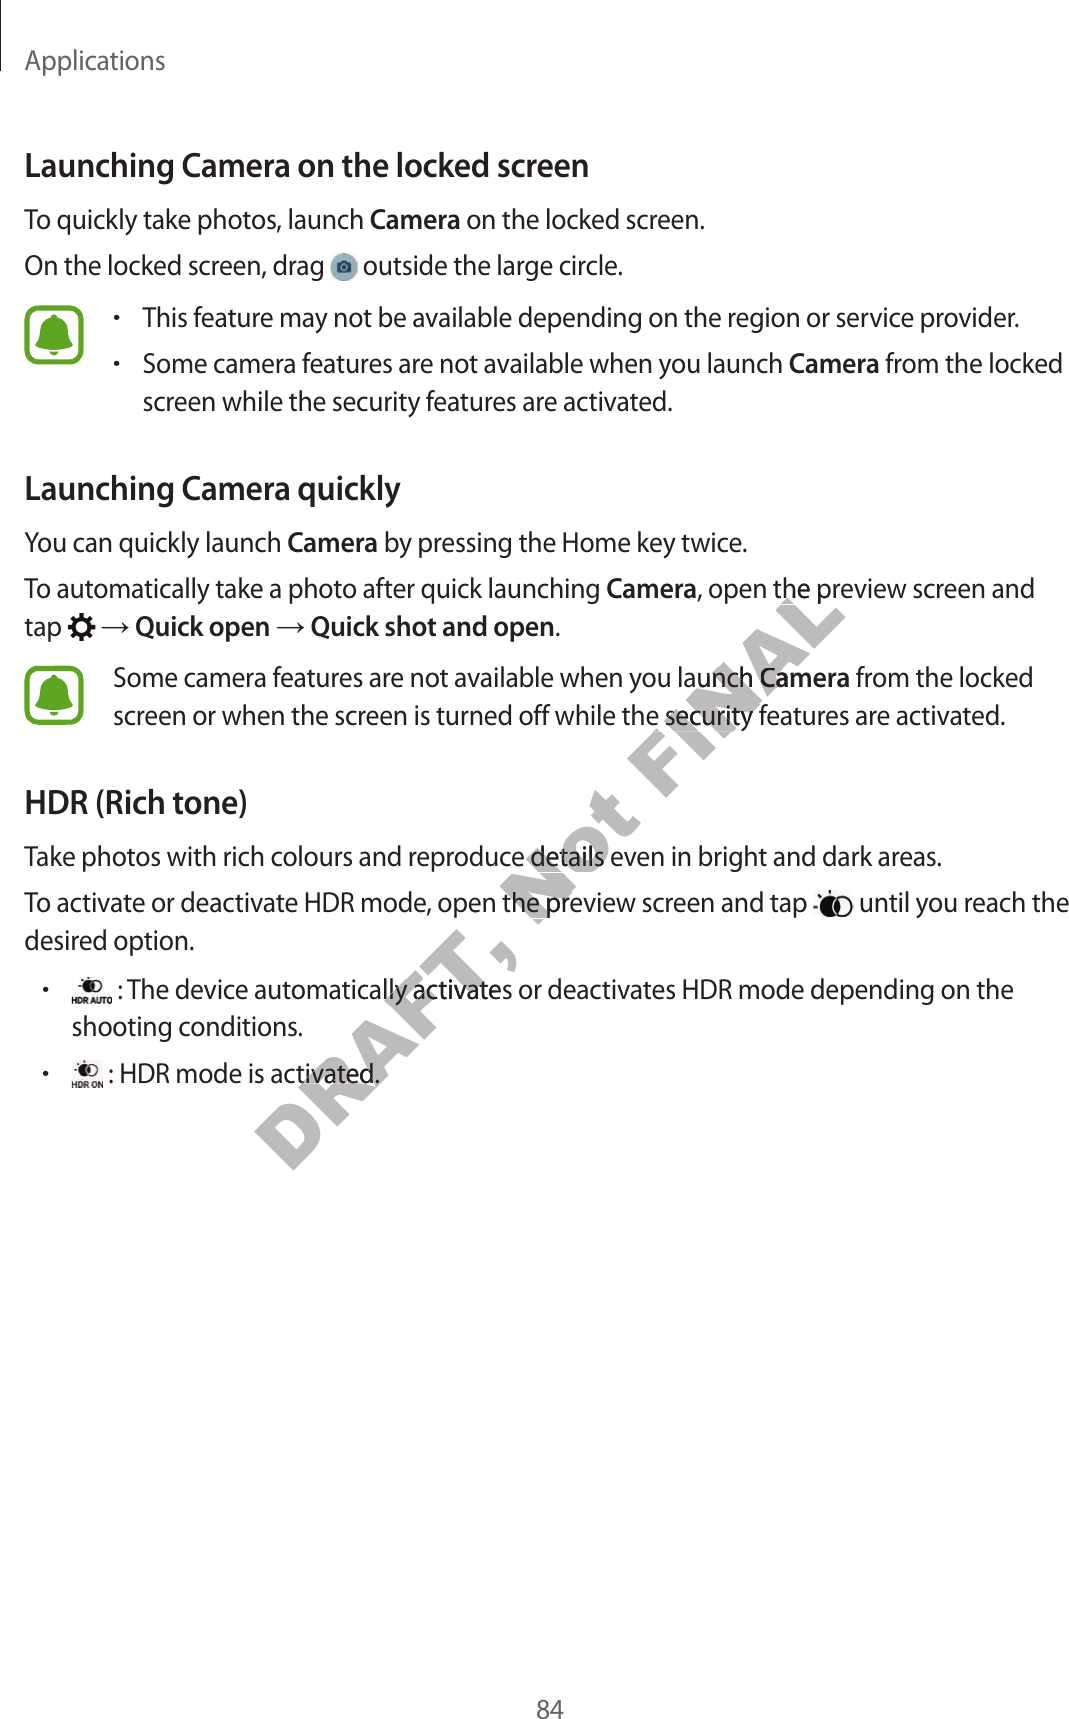 Applications84Launching Camera on the locked screenTo quickly take photos, launch Camera on the locked screen.On the locked screen, drag   outside the large circle.•This feature may not be available depending on the region or service provider.•Some camera features are not available when you launch Camera from the locked screen while the security features are activated.Launching Camera quicklyYou can quickly launch Camera by pressing the Home key twice.To automatically take a photo after quick launching Camera, open the preview screen and tap    Quick open  Quick shot and open.Some camera features are not available when you launch Camera from the locked screen or when the screen is turned off while the security features are activated.HDR (Rich tone)Take photos with rich colours and reproduce details even in bright and dark areas.To activate or deactivate HDR mode, open the preview screen and tap   until you reach the desired option.• : The device automatically activates or deactivates HDR mode depending on the shooting conditions.• : HDR mode is activated.DRAFT, , open the prtically activates or deactically activat : HDR mode is activated. : HDR mode is activated.Not oduce details evoduce details ev, open the preview scr, open the preview scrFINAL, open the pr, open the prou launch ou launch CamerCamerned off while the security fned off while the security f